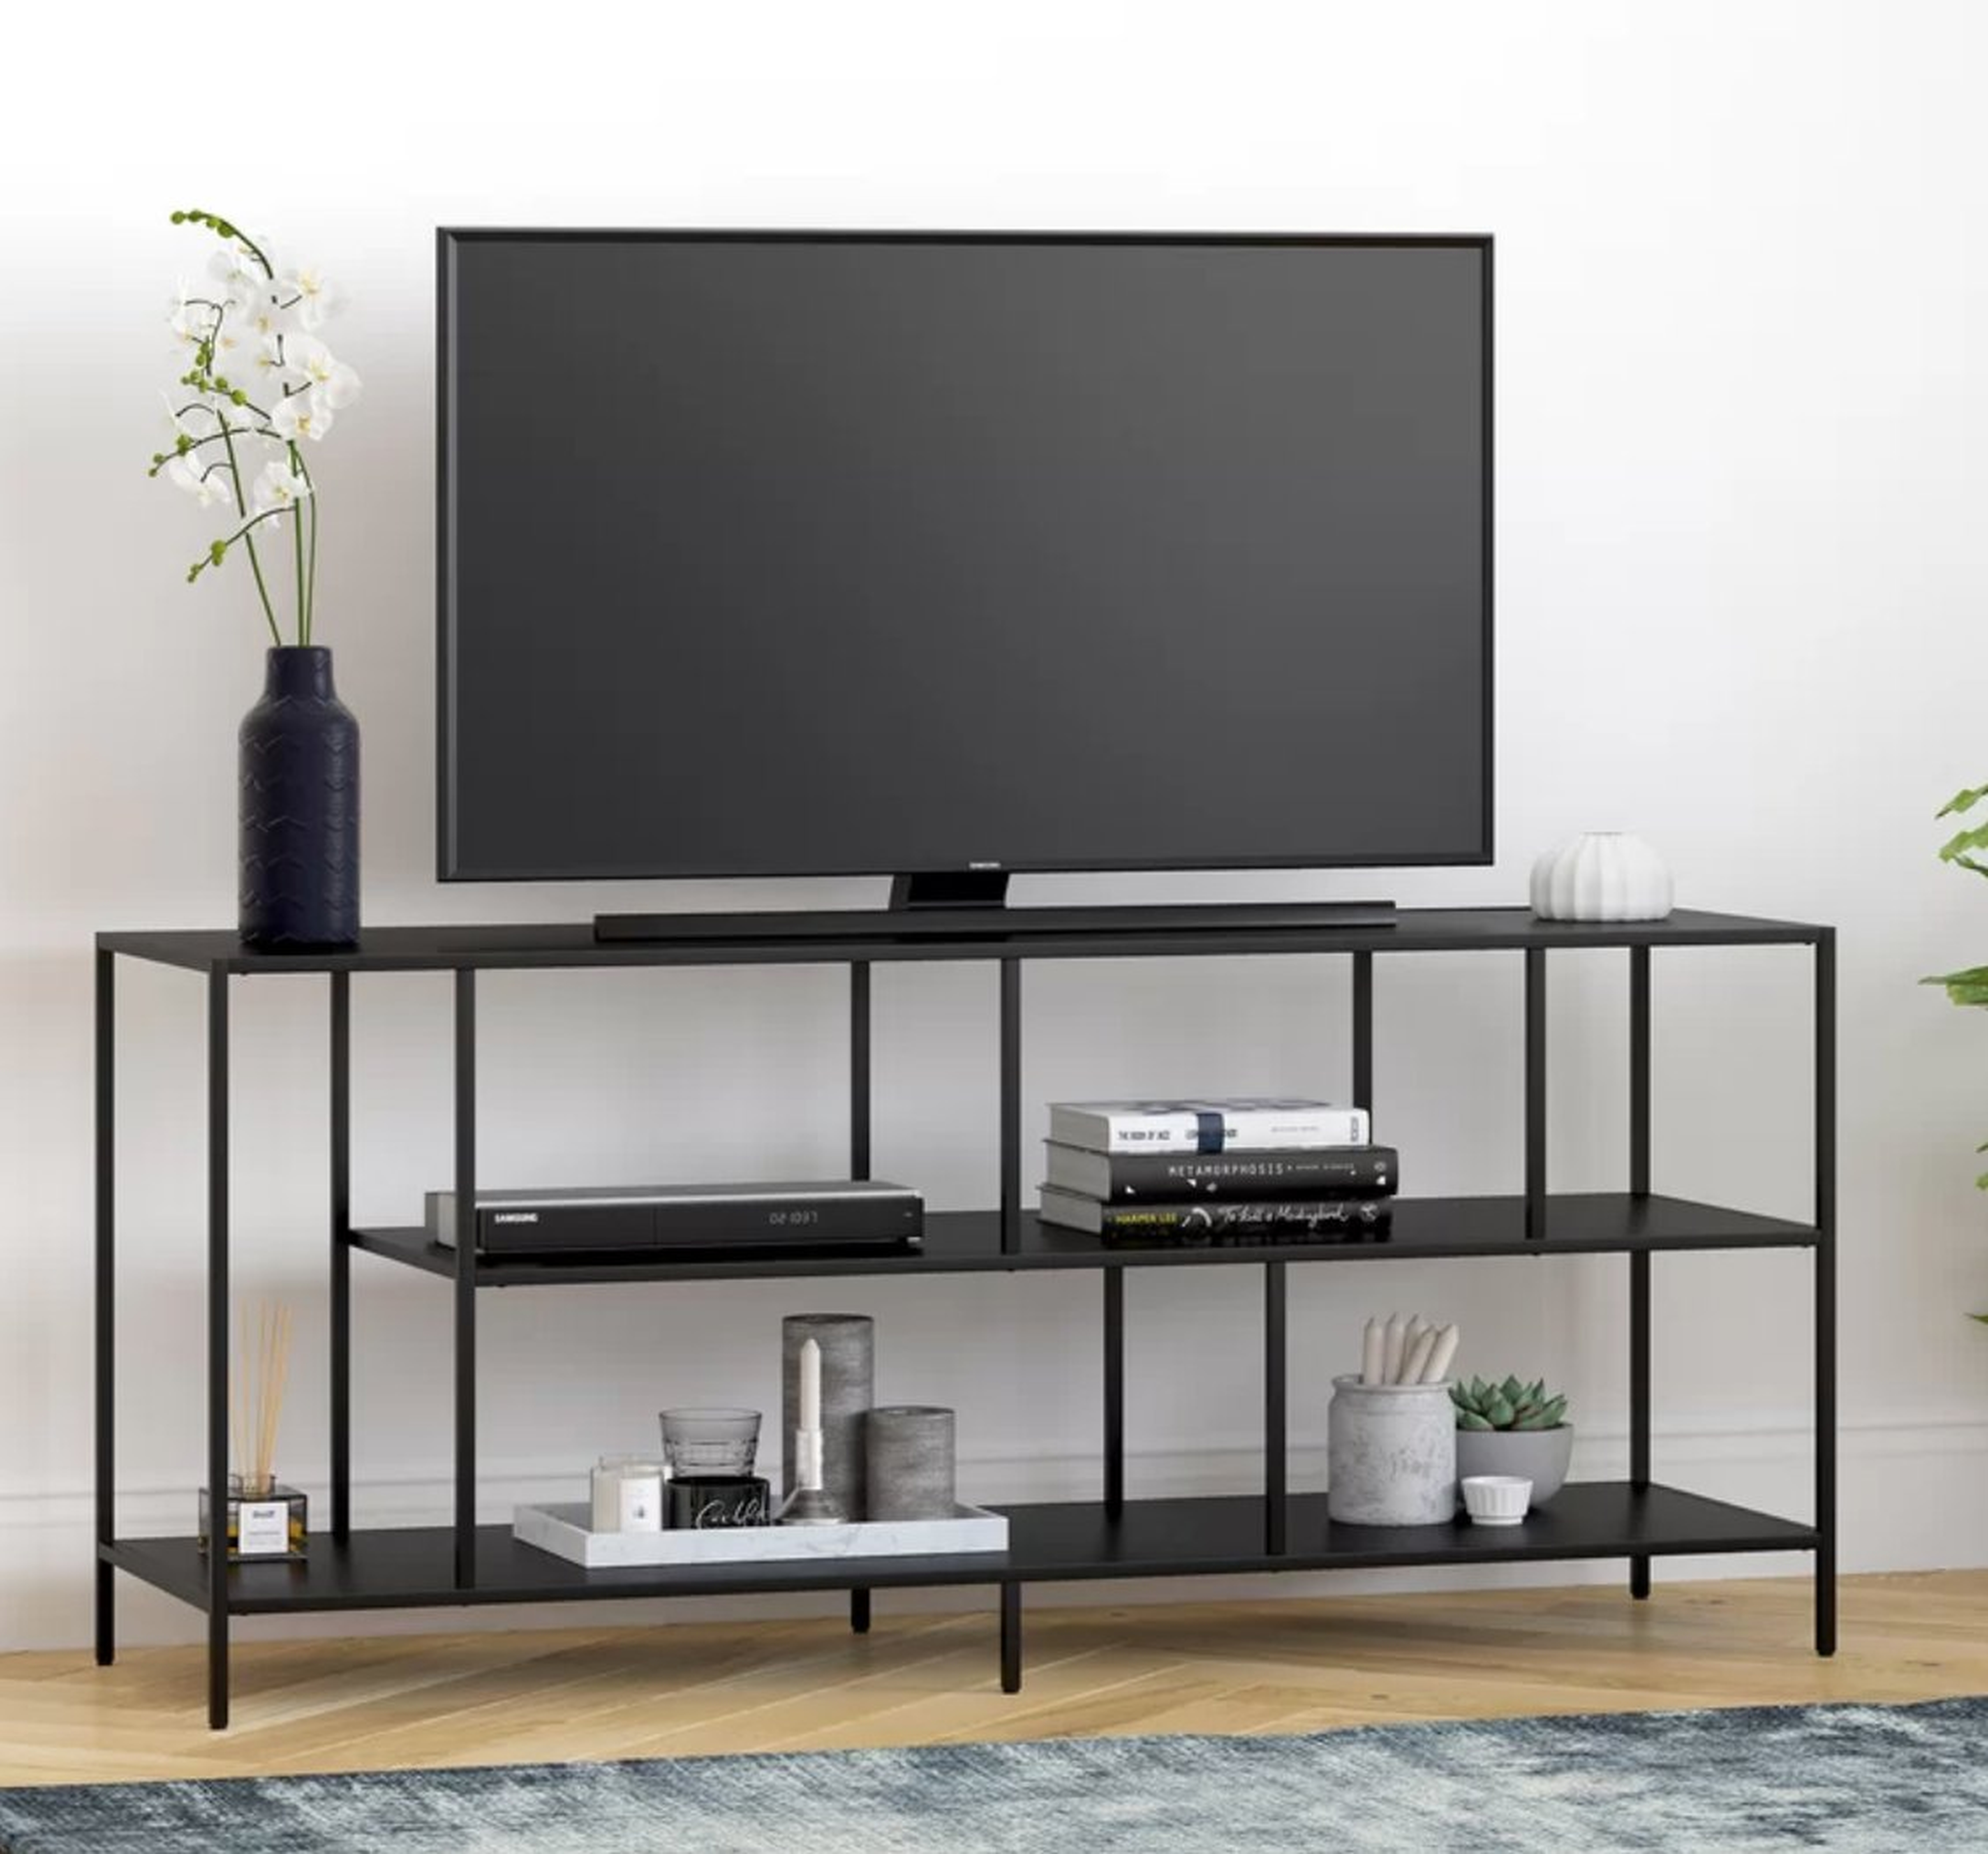 Alphin Open Shelving TV Stand for TVs up to 60 inches - Wayfair